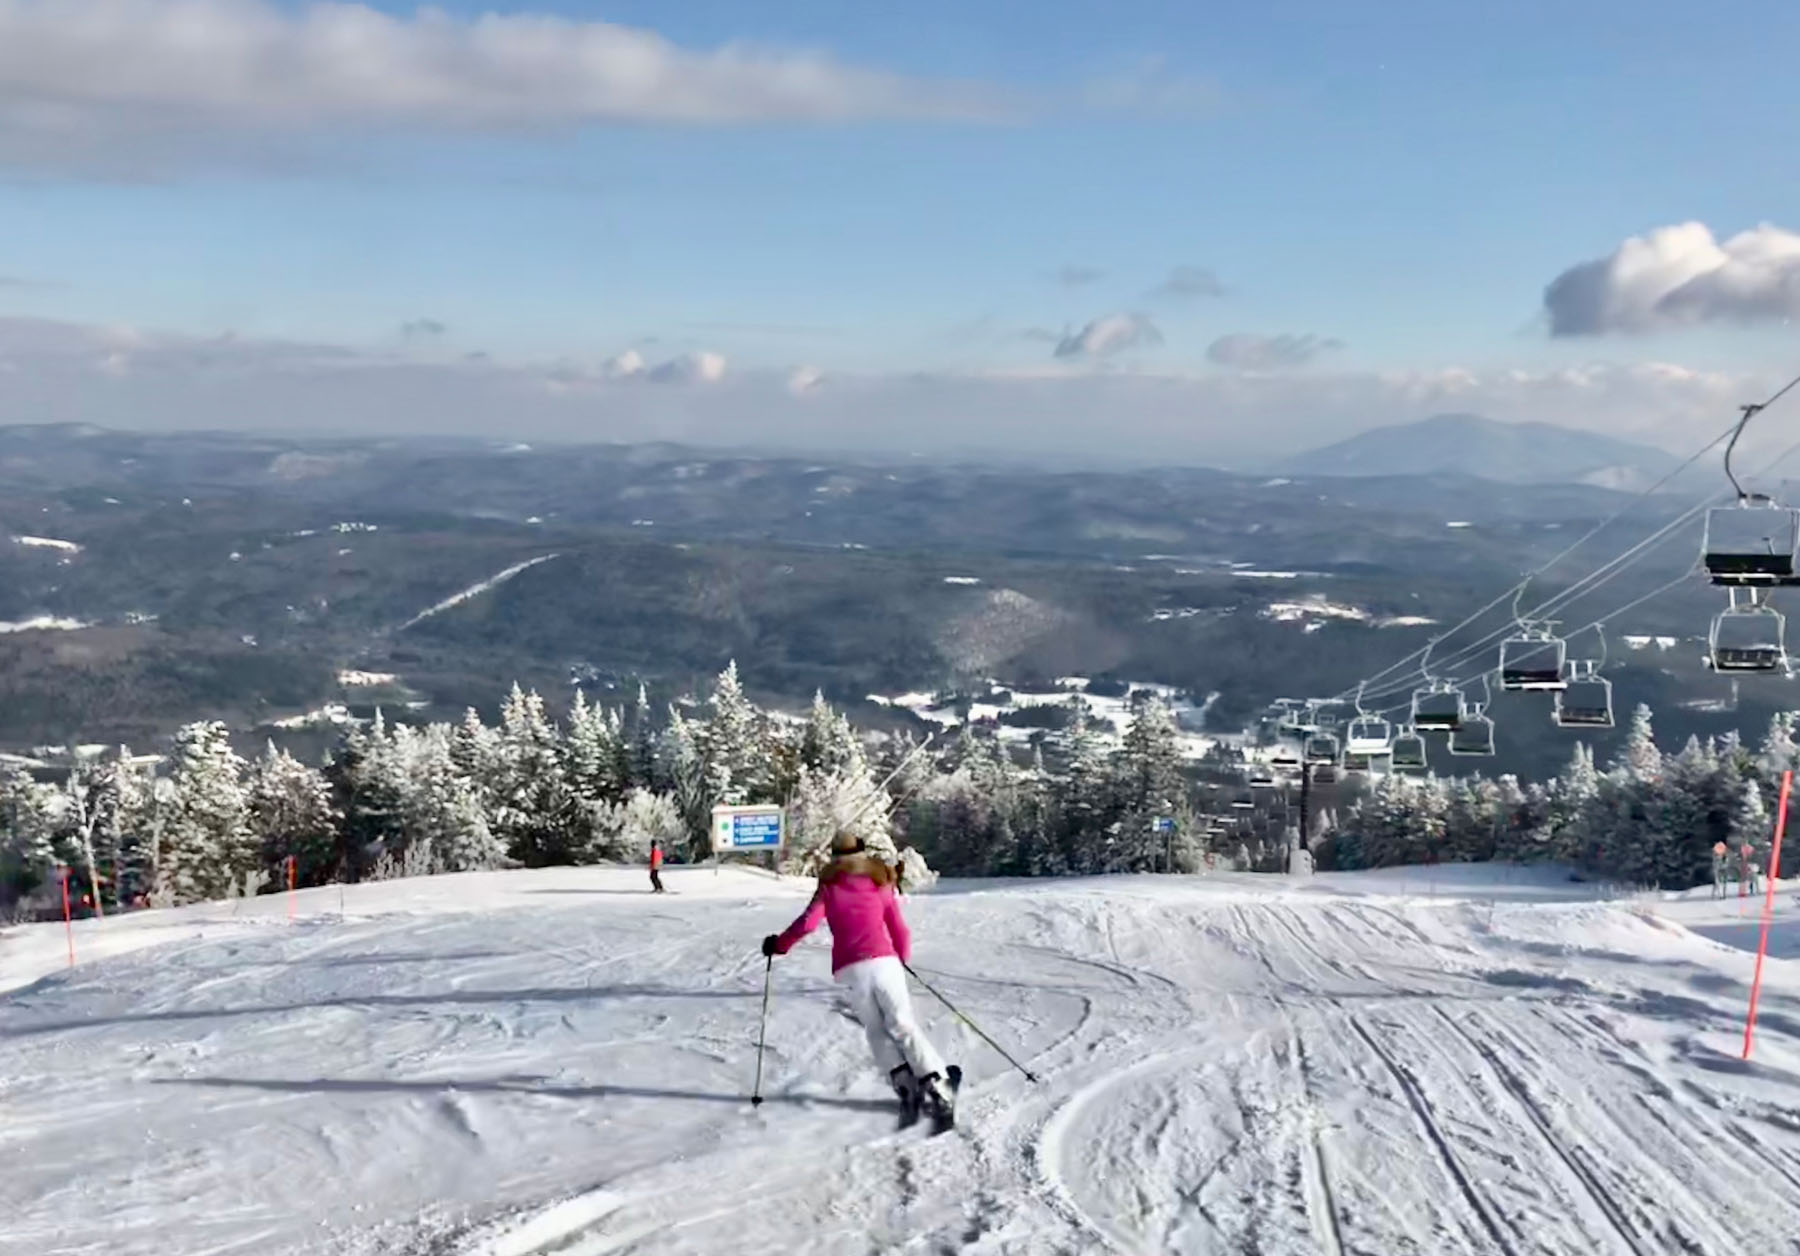 Okemo Mountain Resort, now with Crested Butte Mountain Resort and Mount Sunapee are EPIC. Vail Resorts finalised its purchase of all three resorts and are now EPIC. 